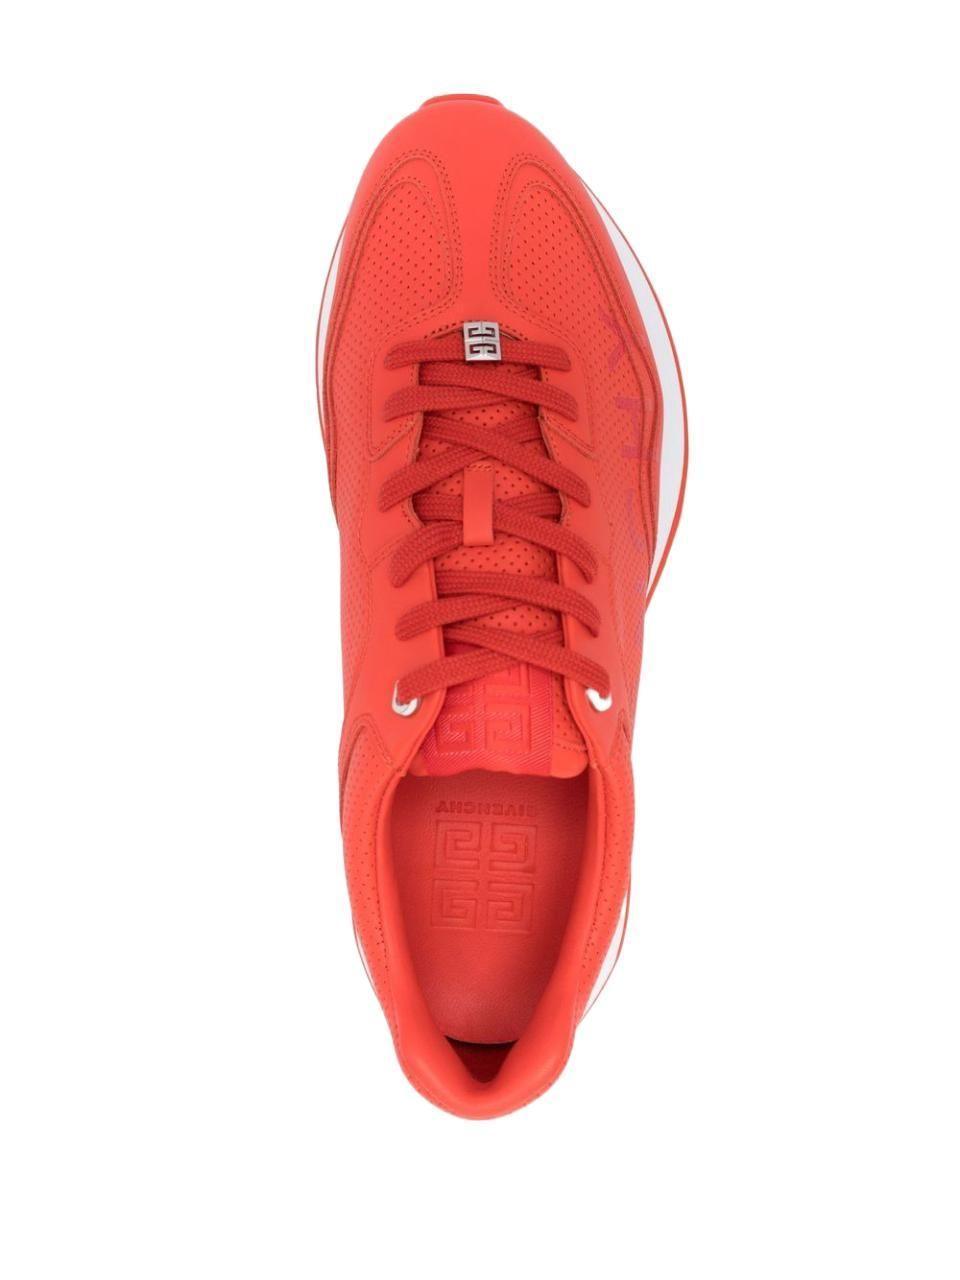 GIVENCHY GIVENCHY ORANGE SNEAKERS